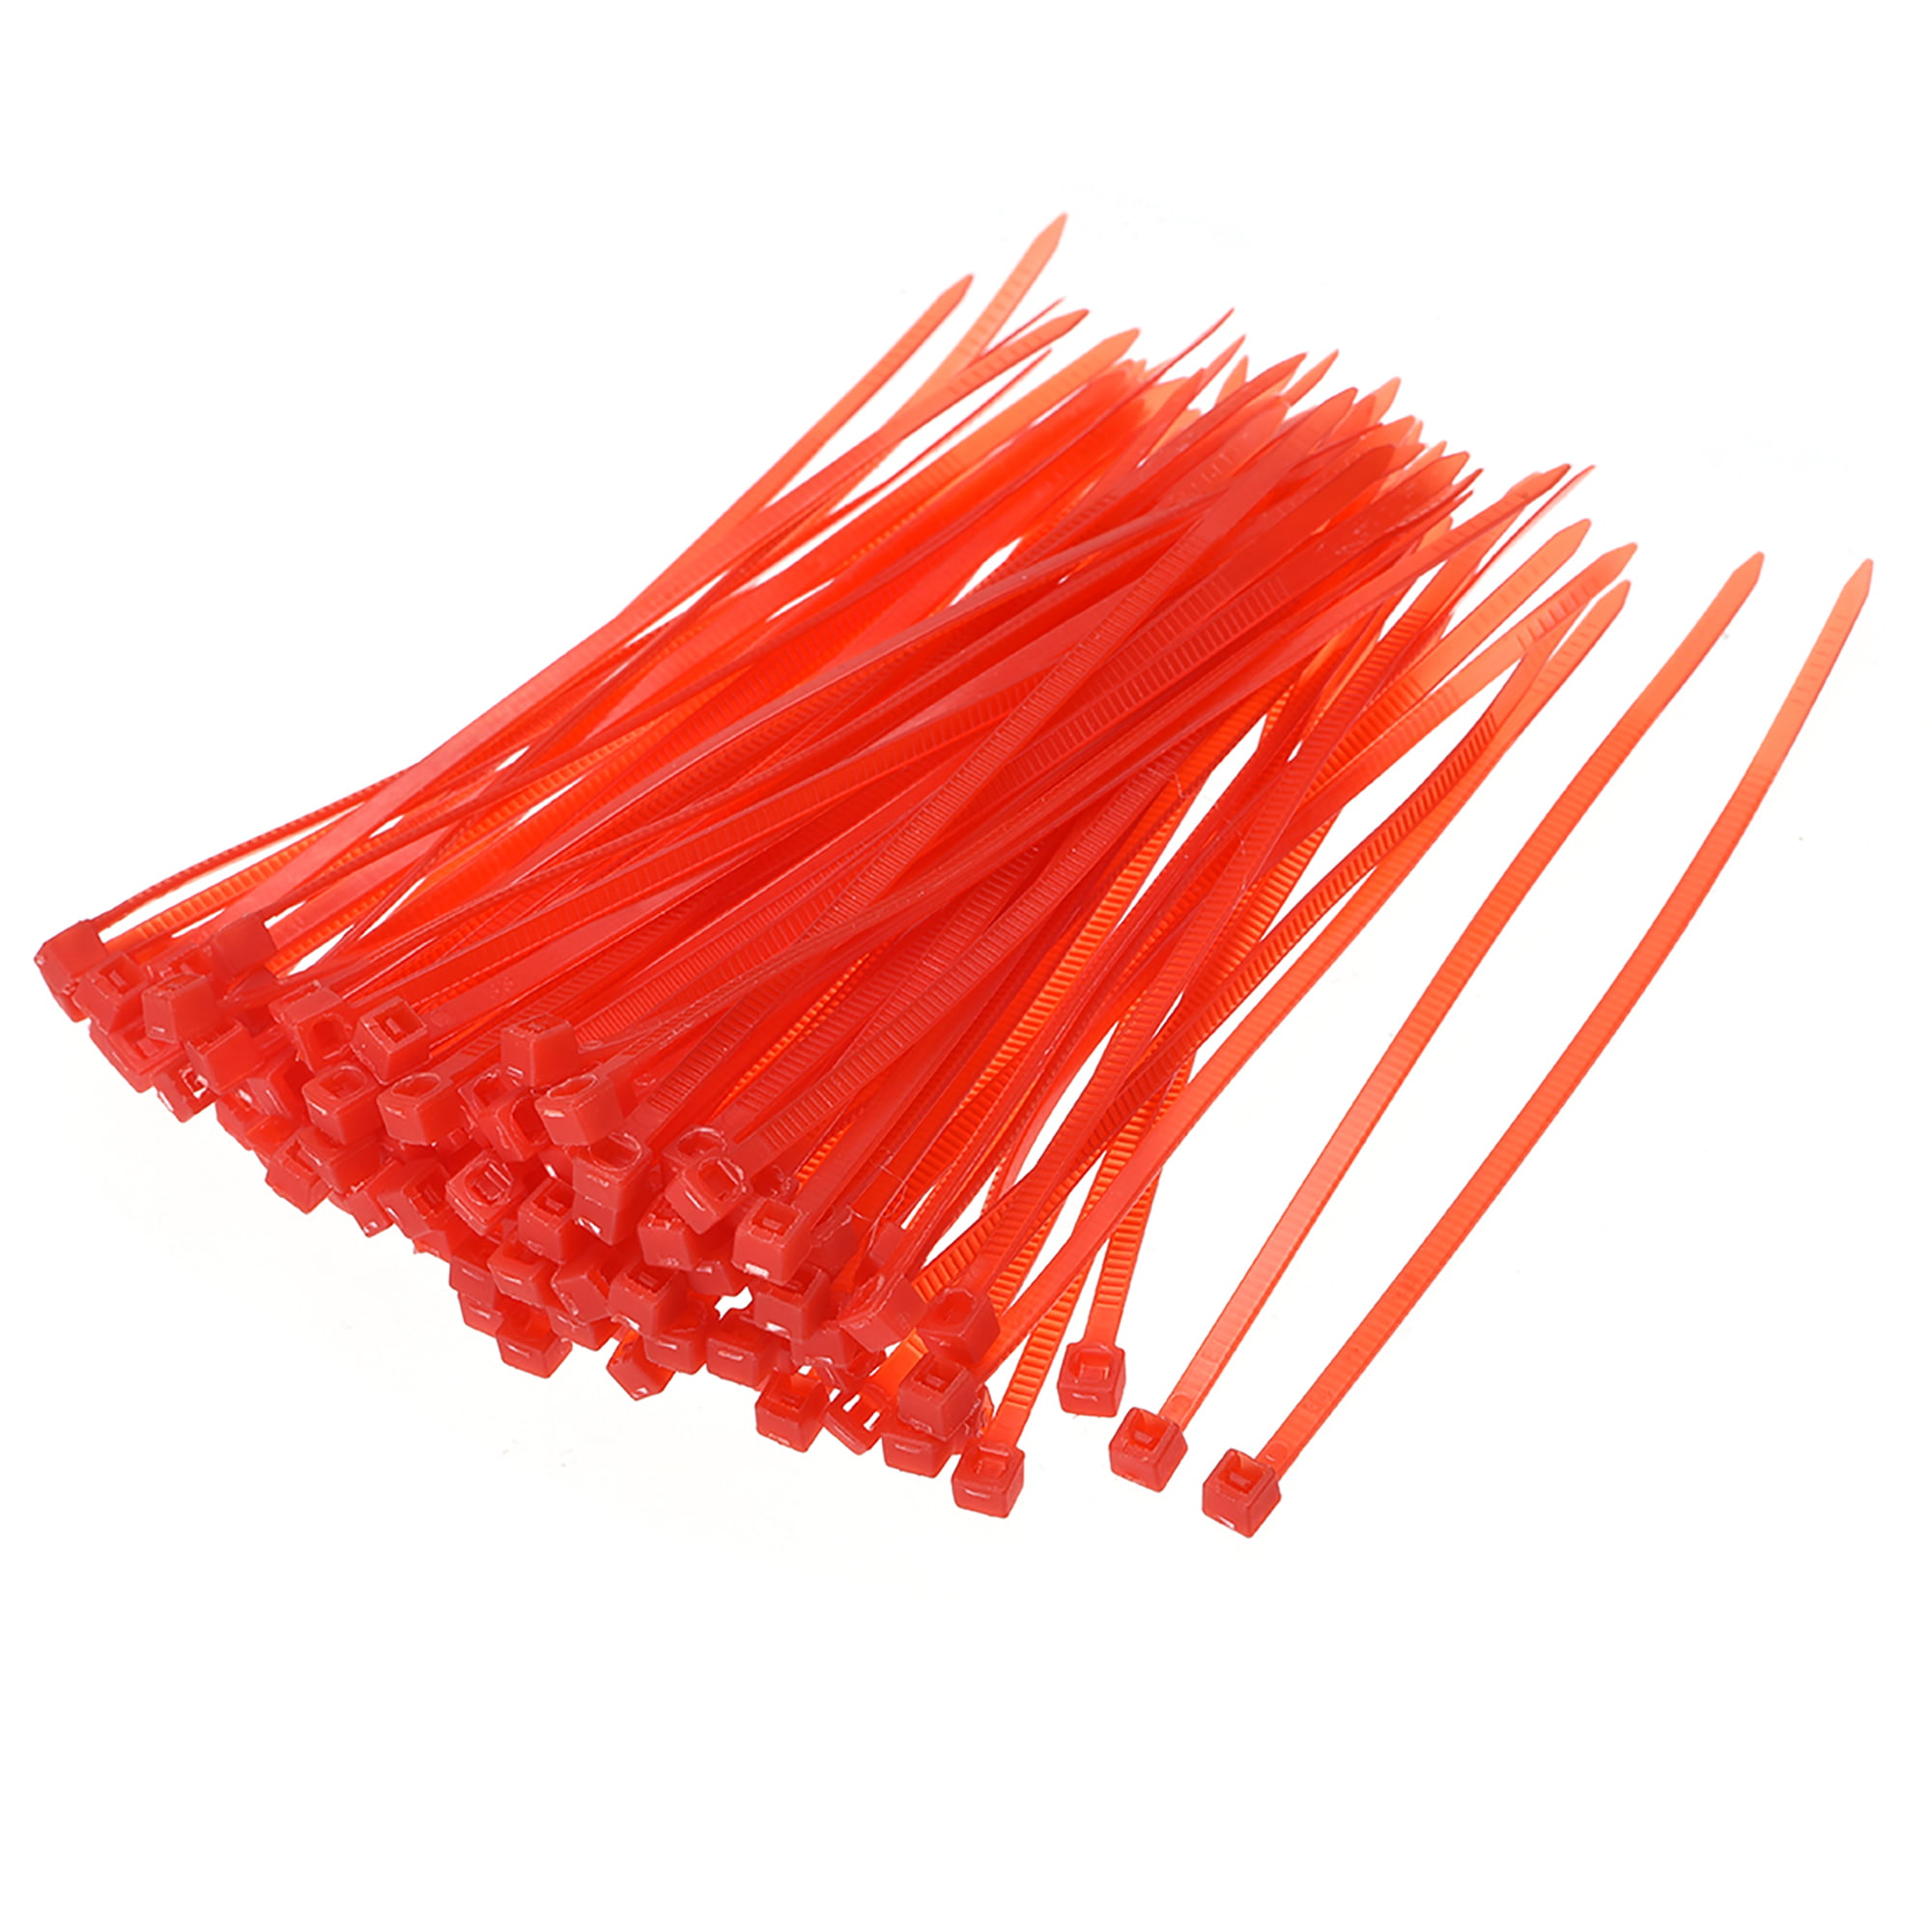 25 Heavy Duty 4" 18 Pound Cable Zip Ties Nylon Wrap Red 